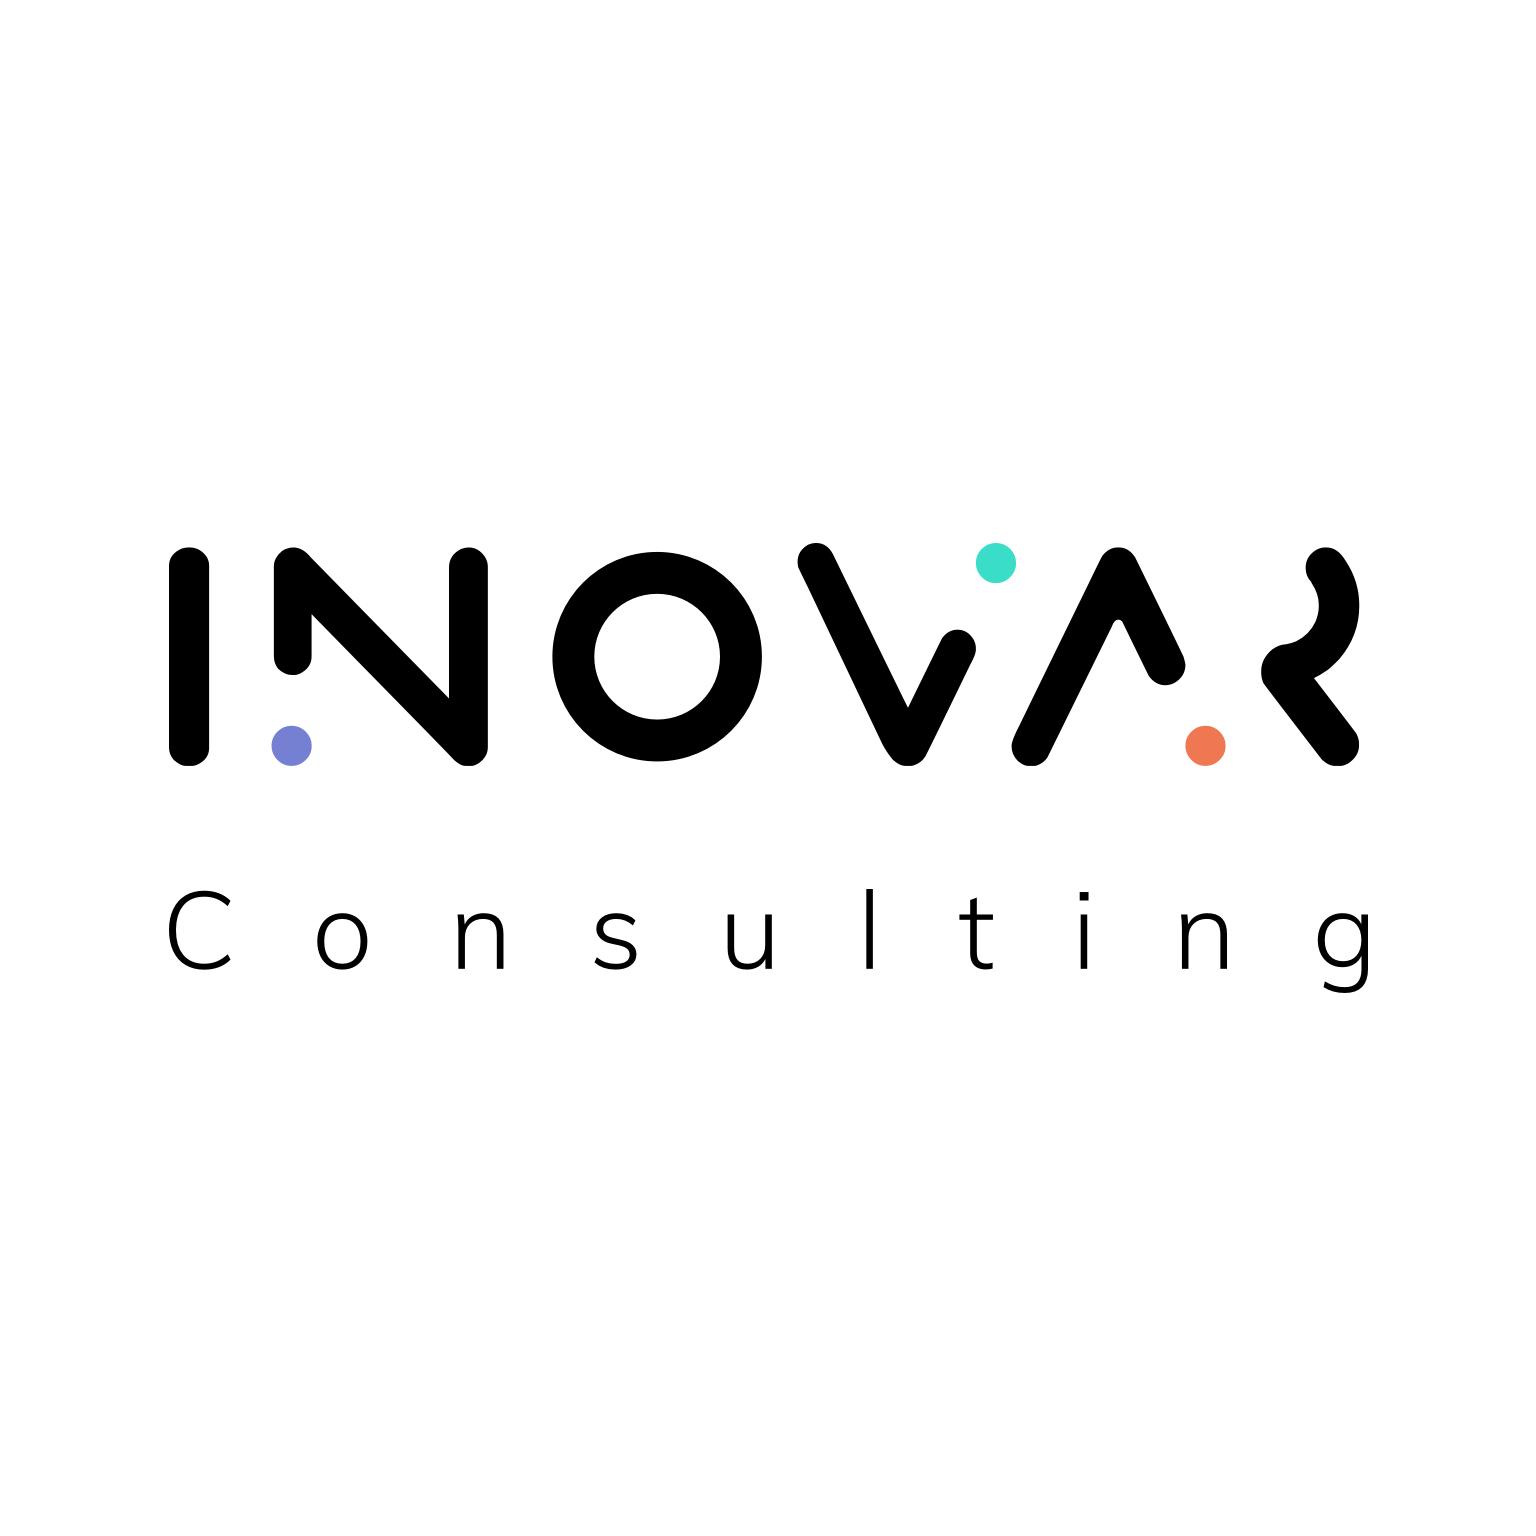 Inovar Consulting profile on Qualified.One